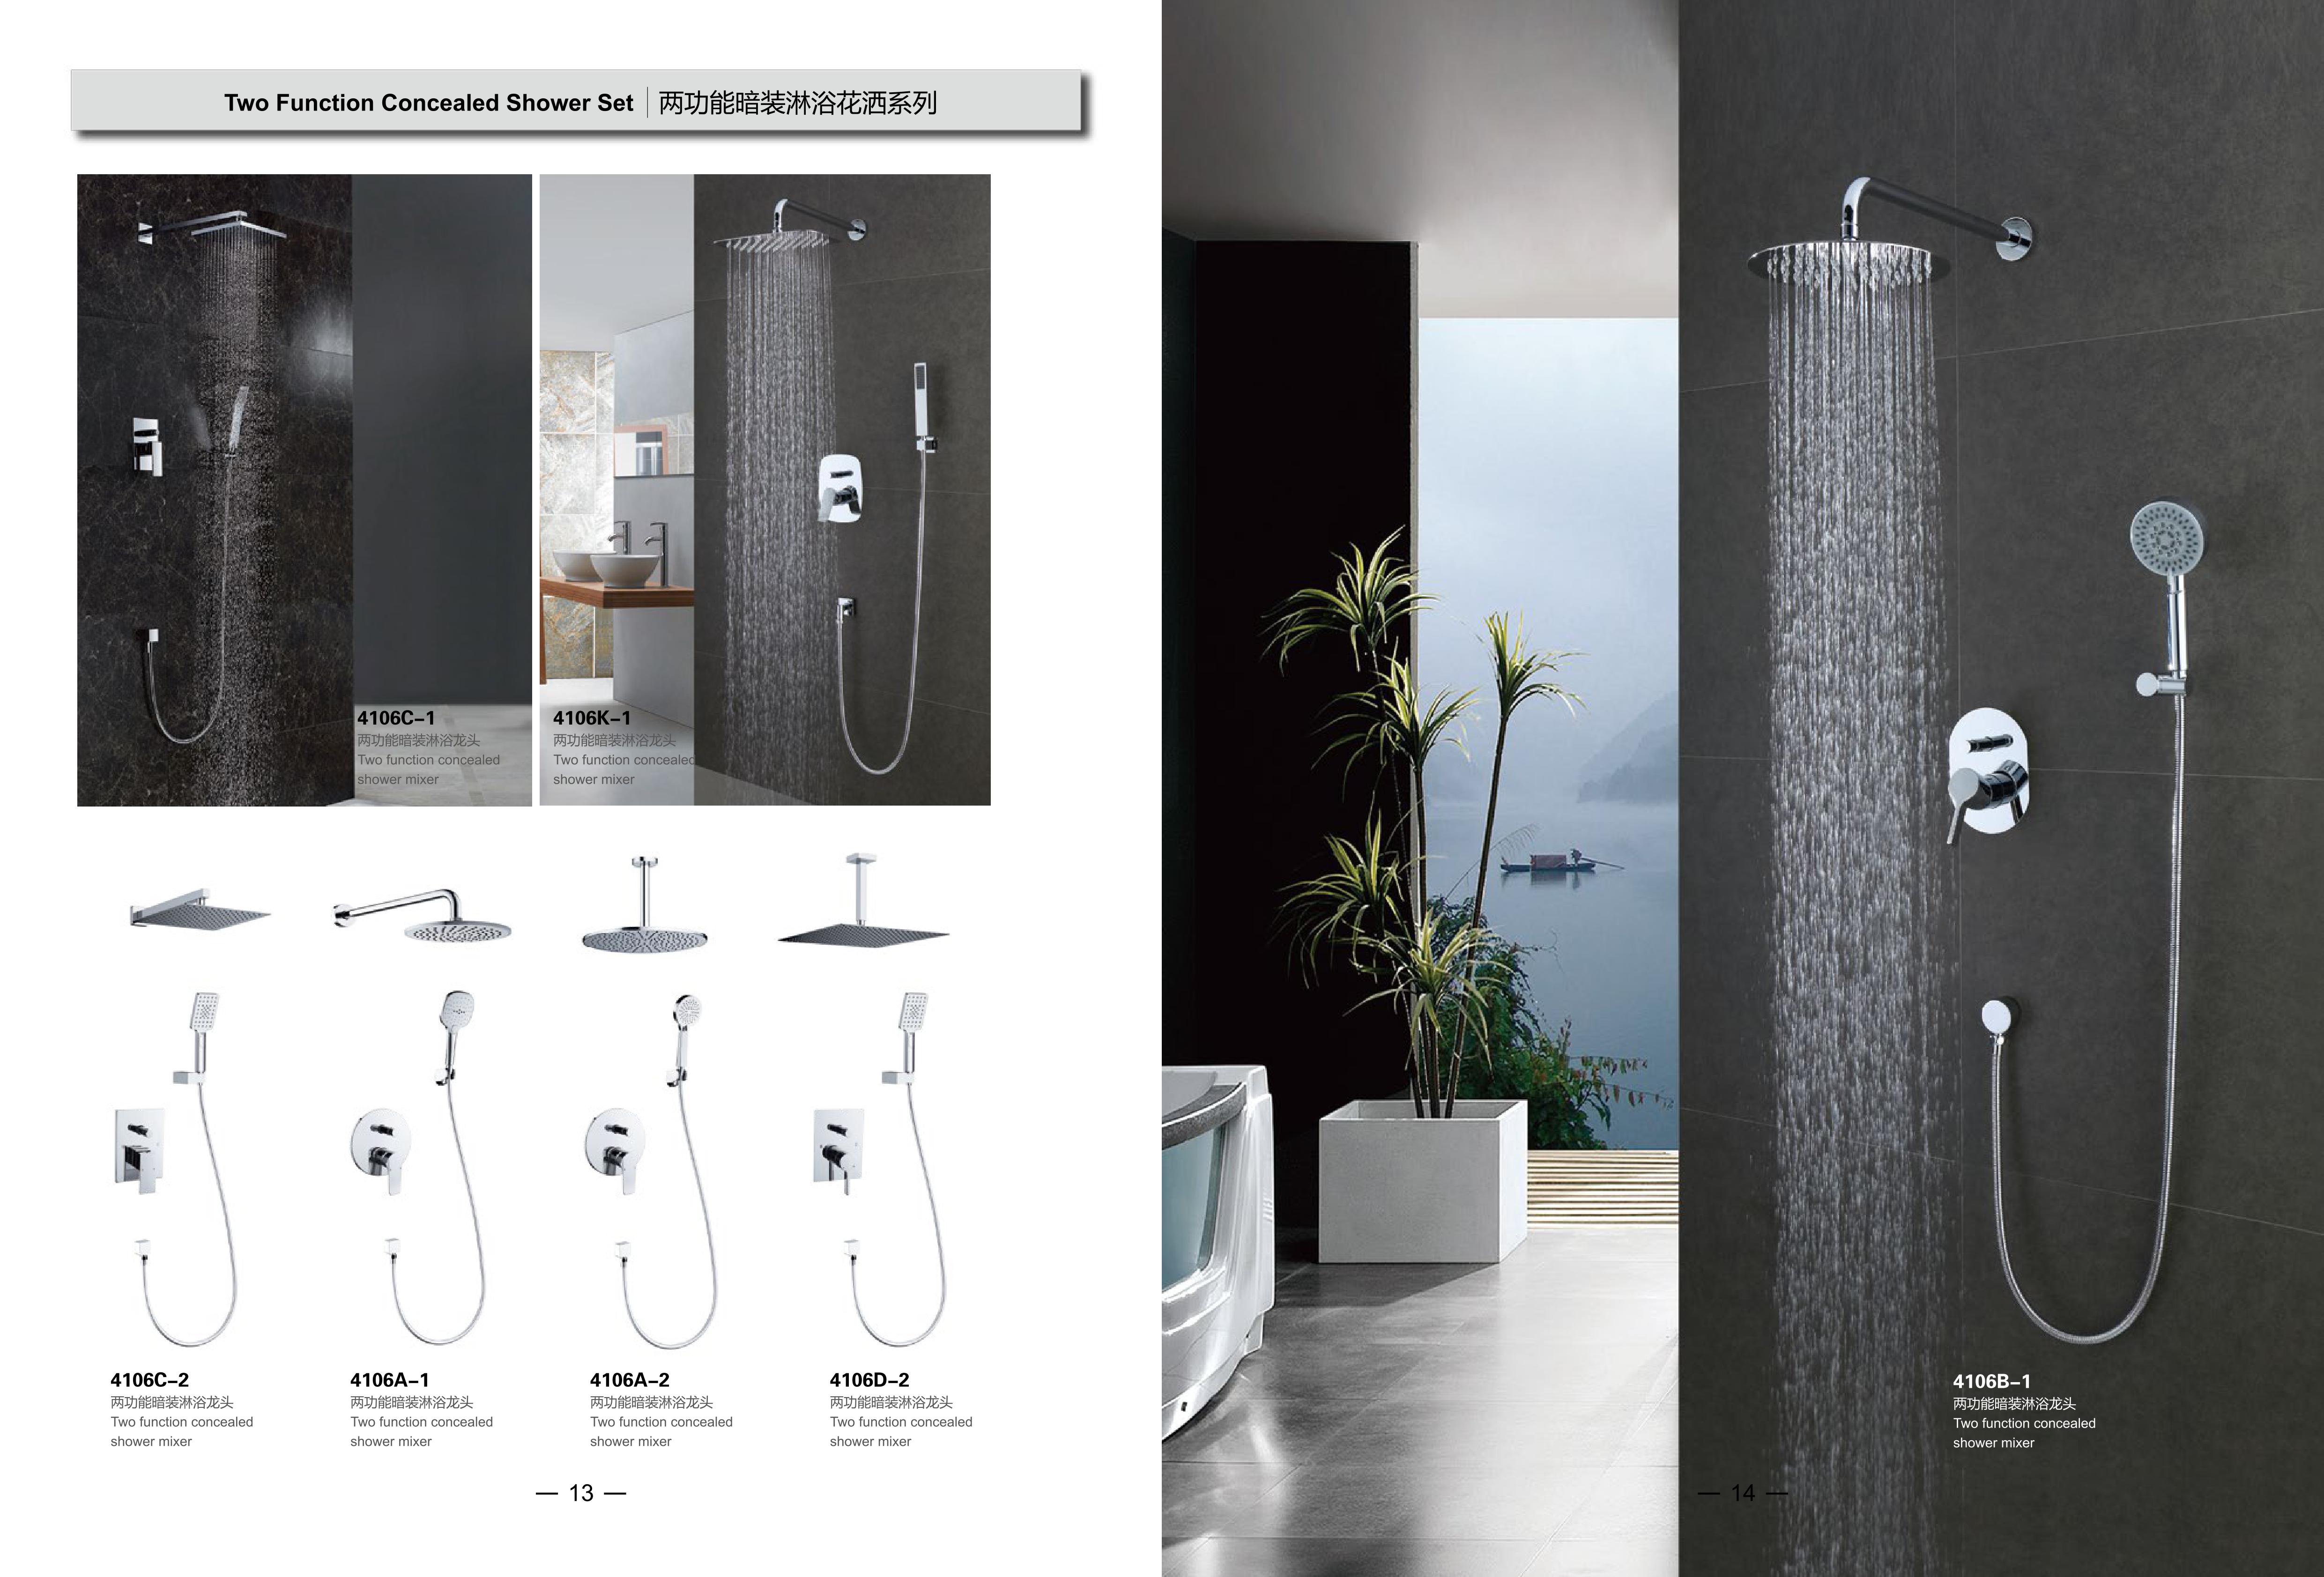 Two Function Concealed Shower Set